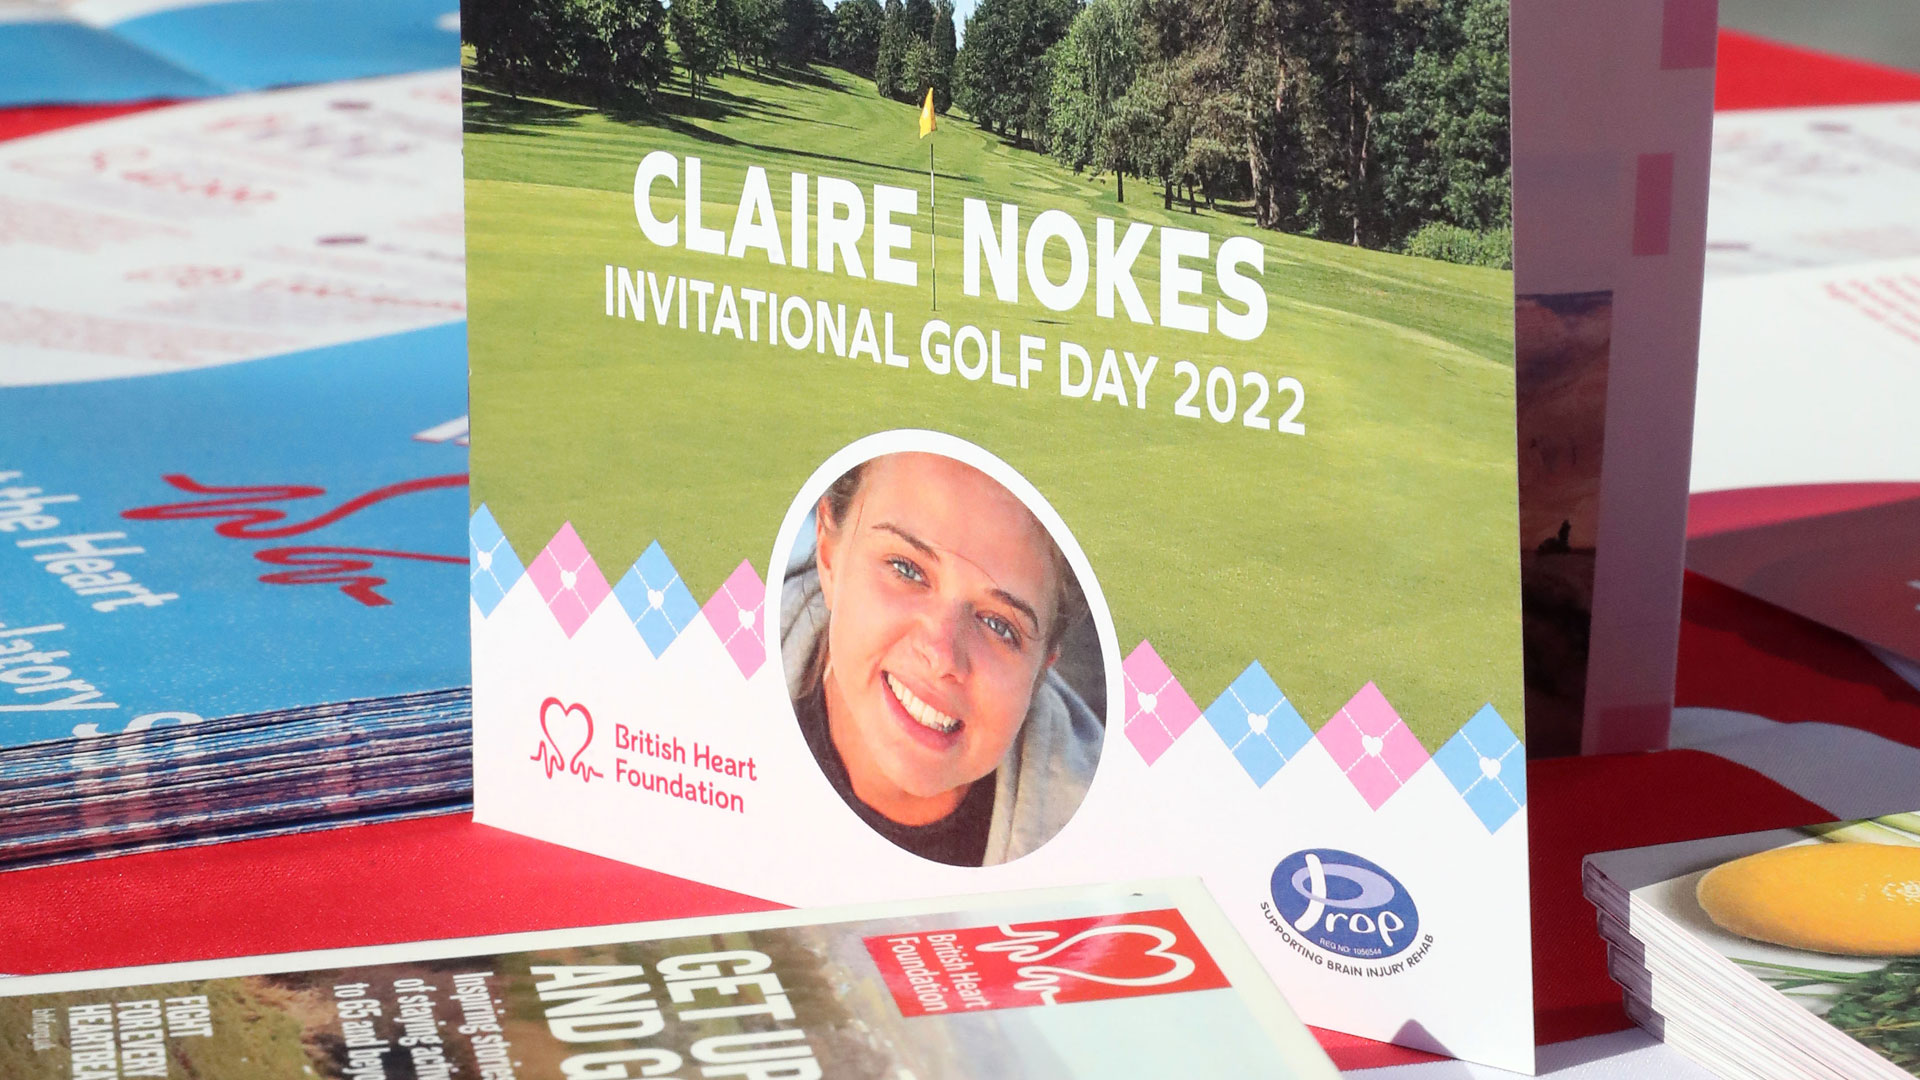 Bluebirds Legends join local celebrities and sponsors to raise valuable funds in Claire Nokes’ memory…